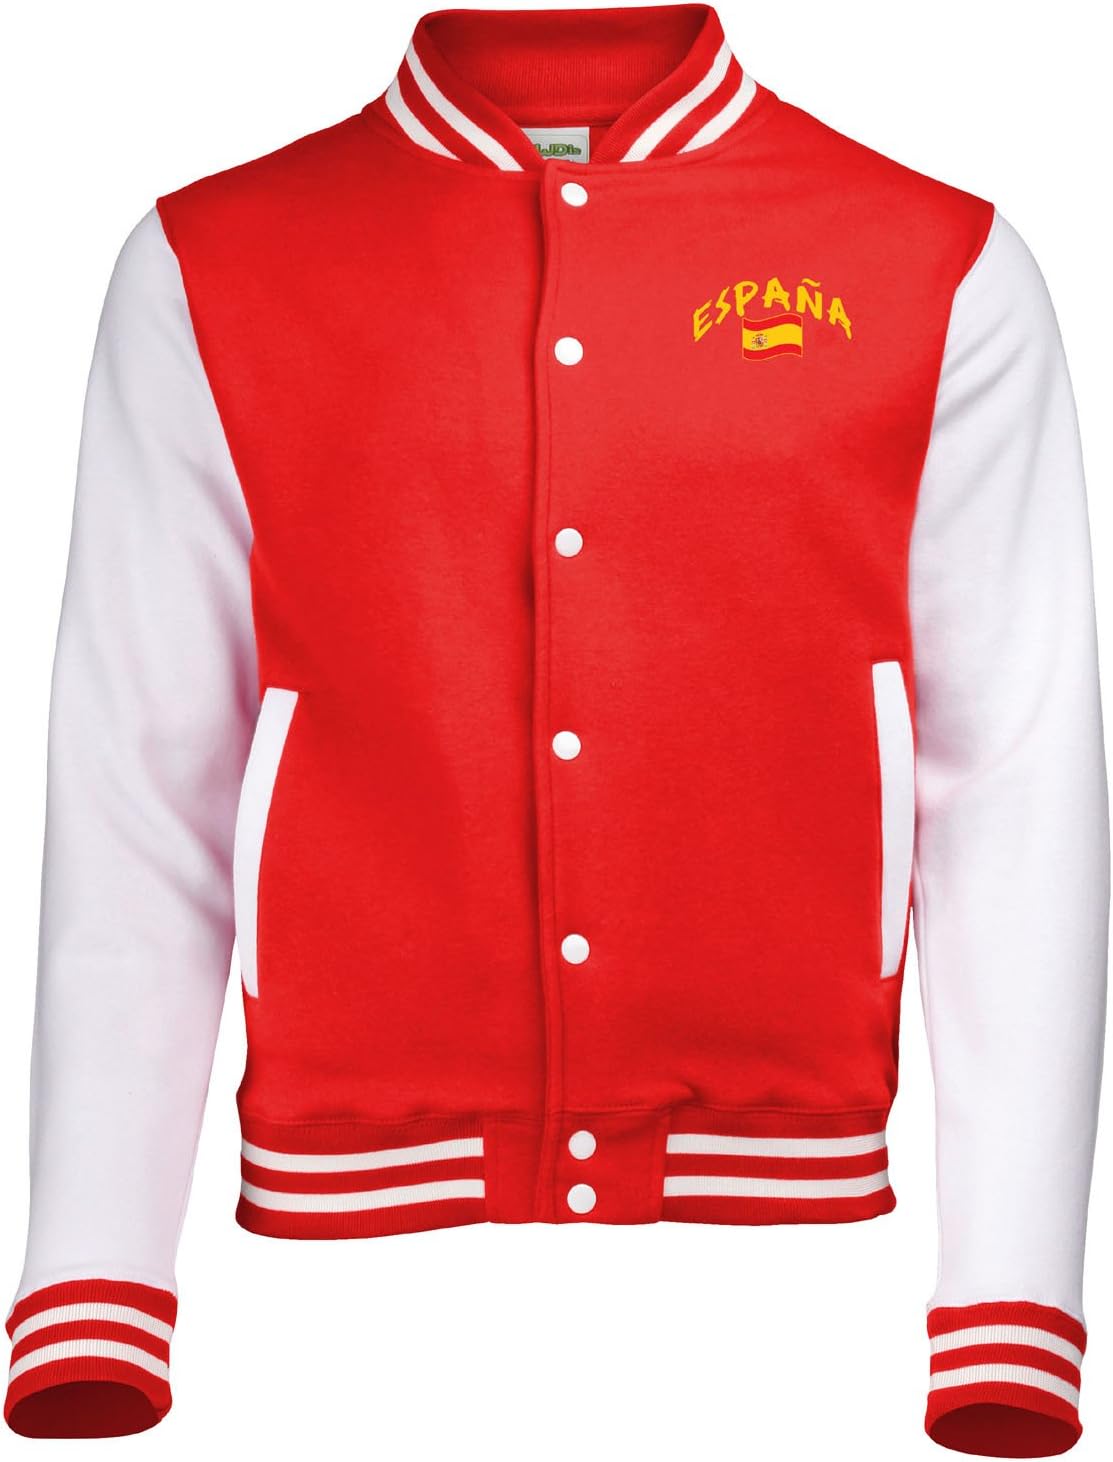 Supportershop Boy's Spain Jacket 7-8 Years Red